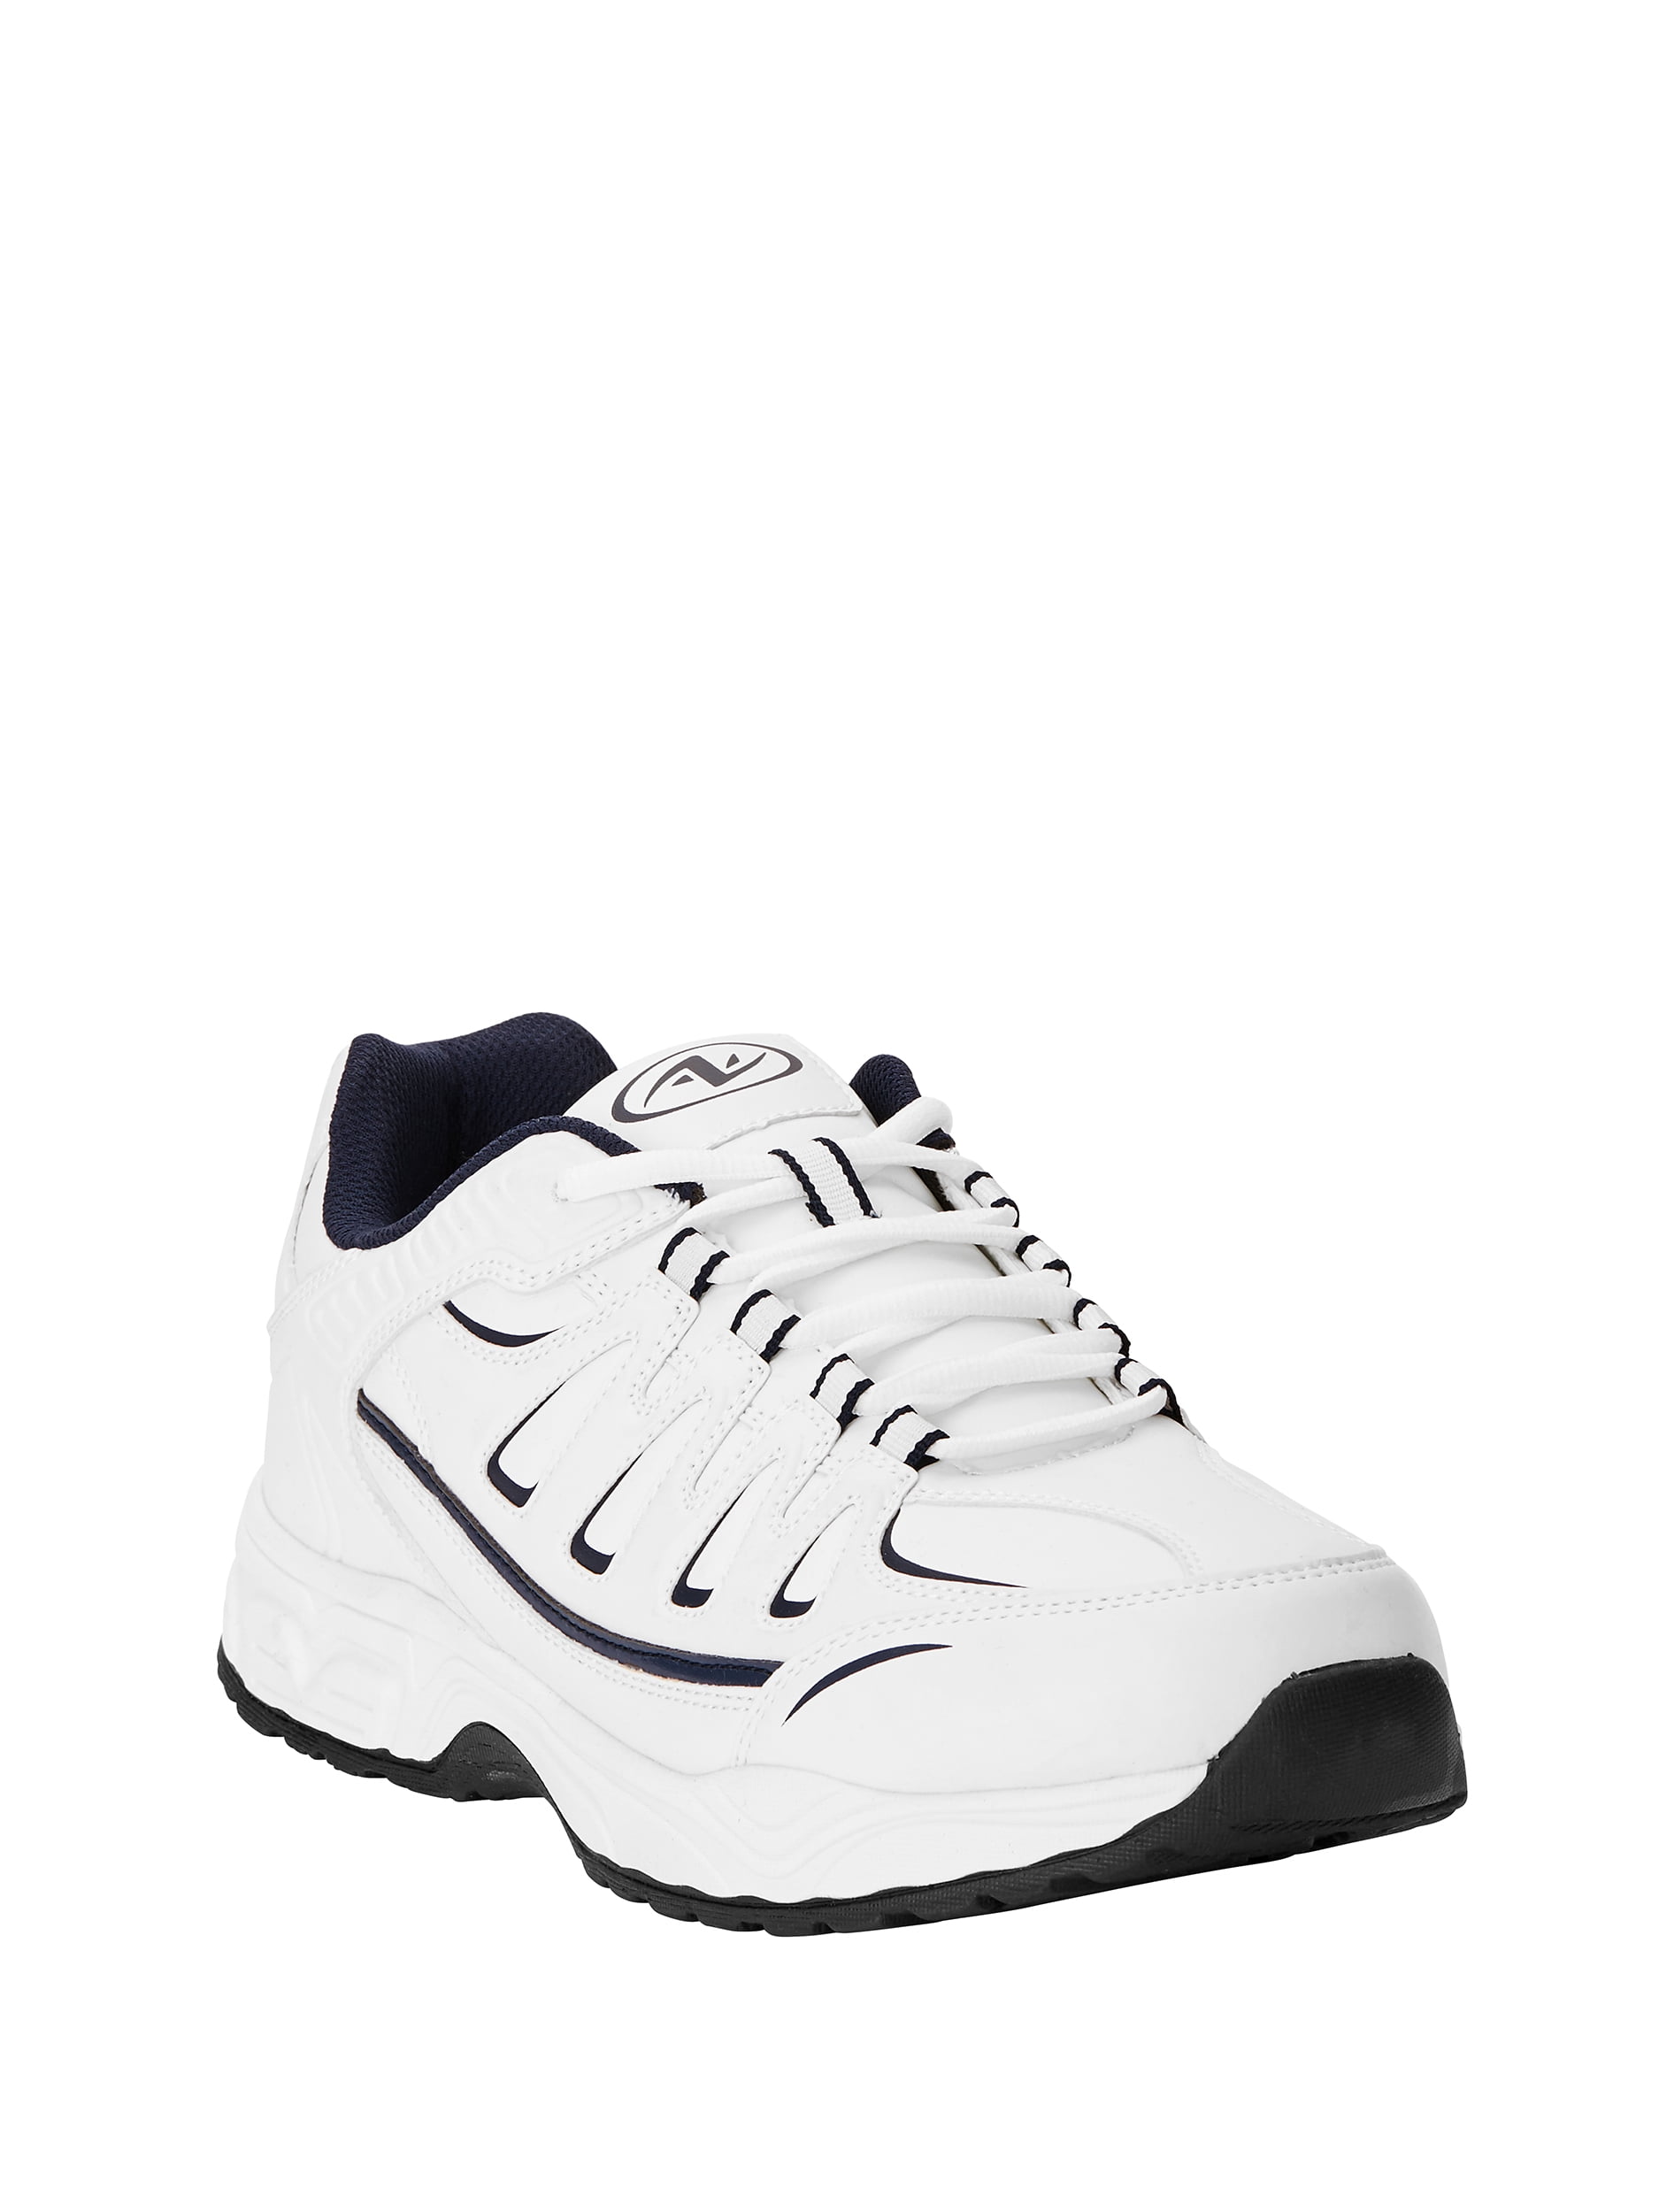 stacy adams tennis shoes